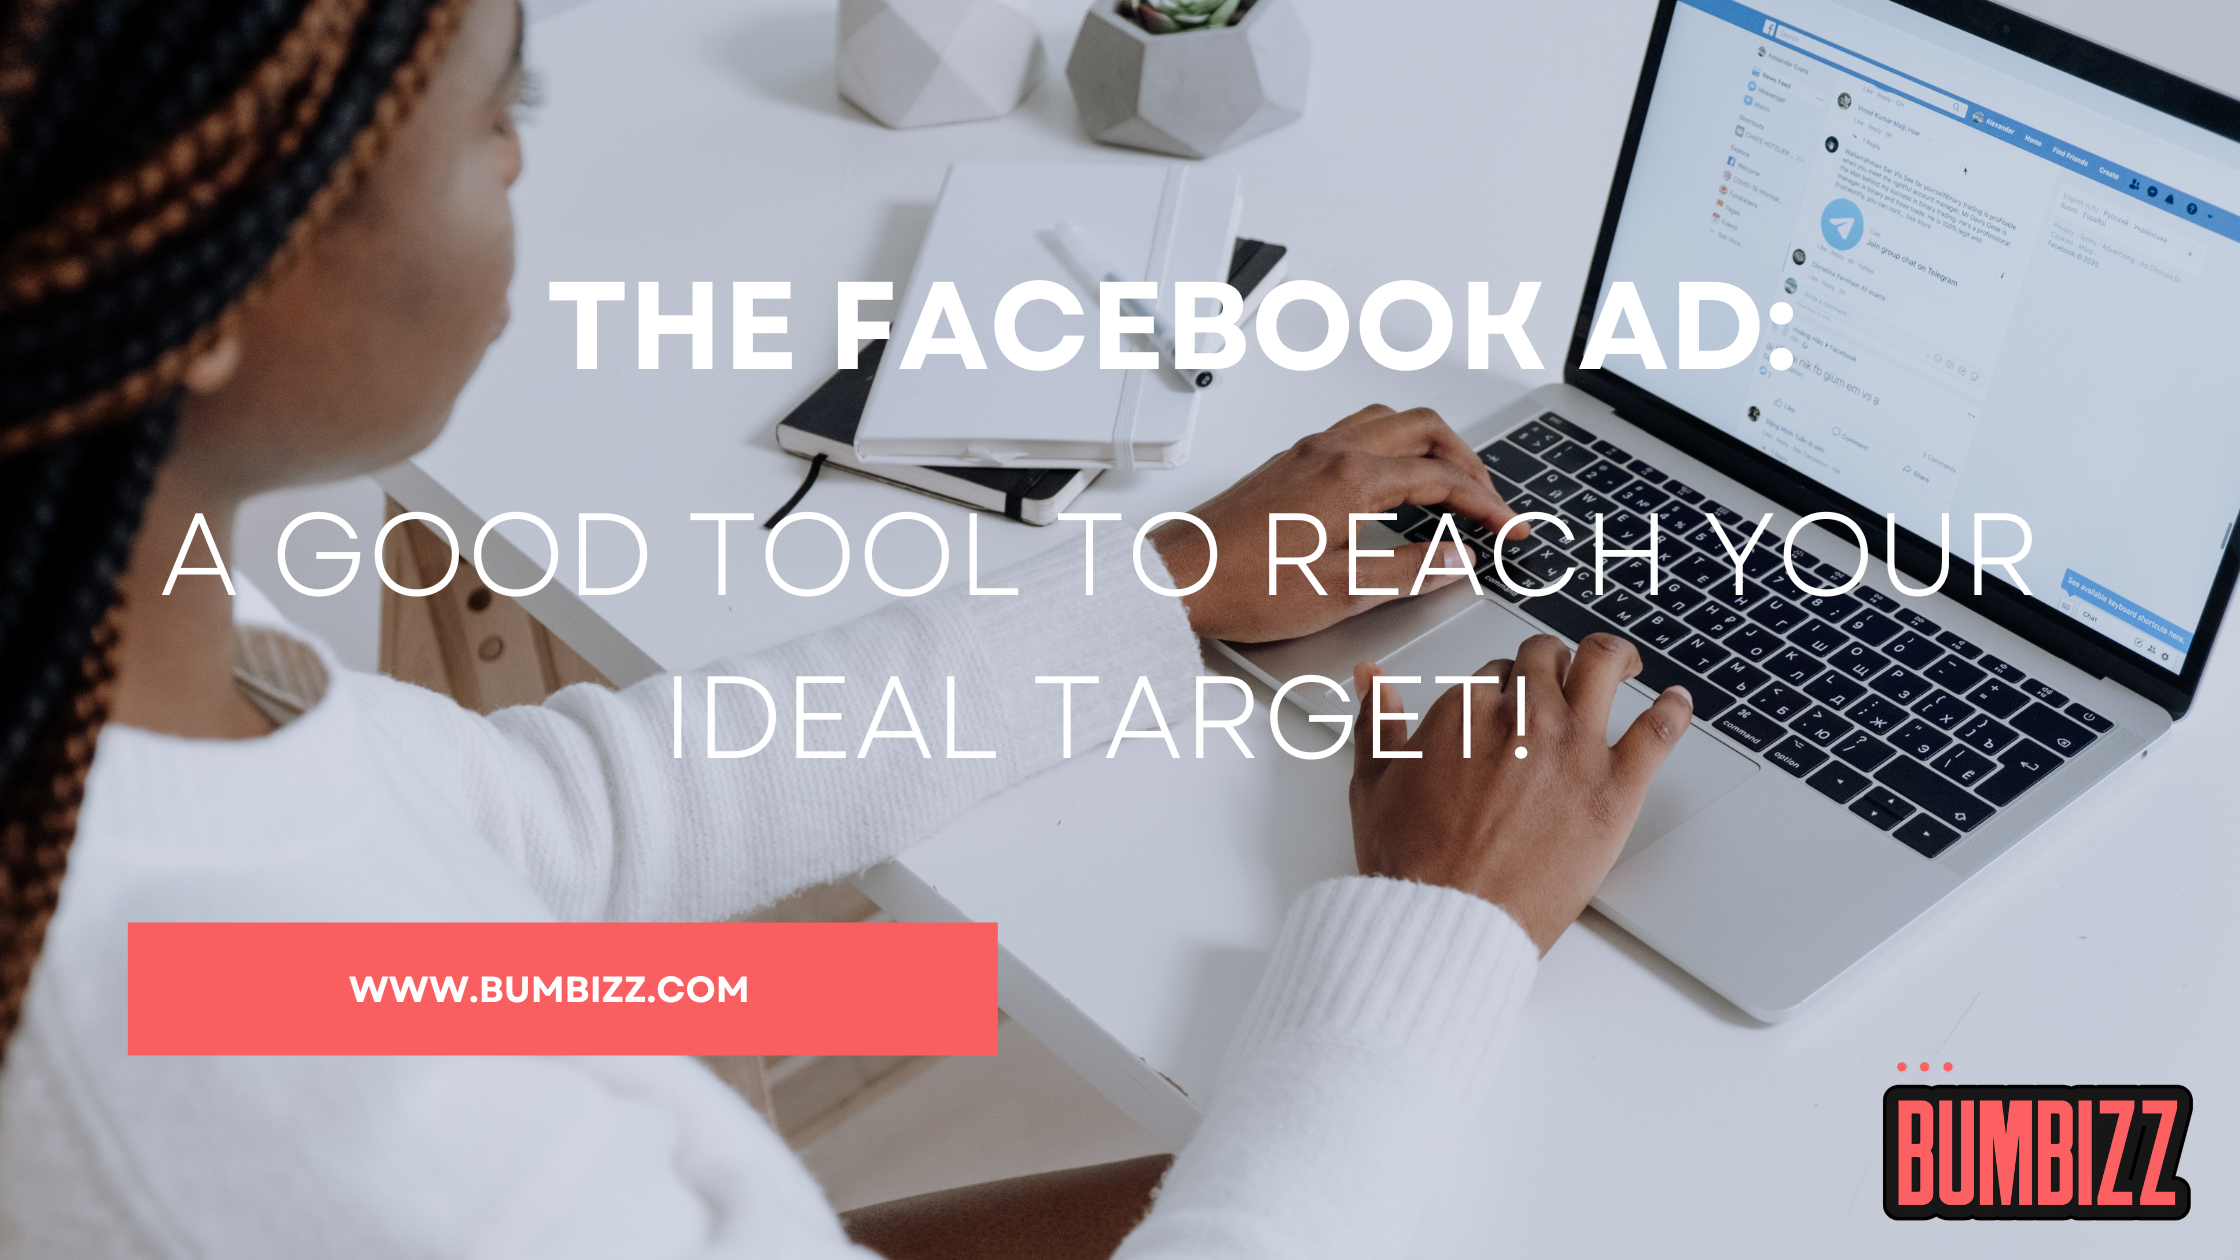 Facebook advertising: a good tool to reach your ideal target!